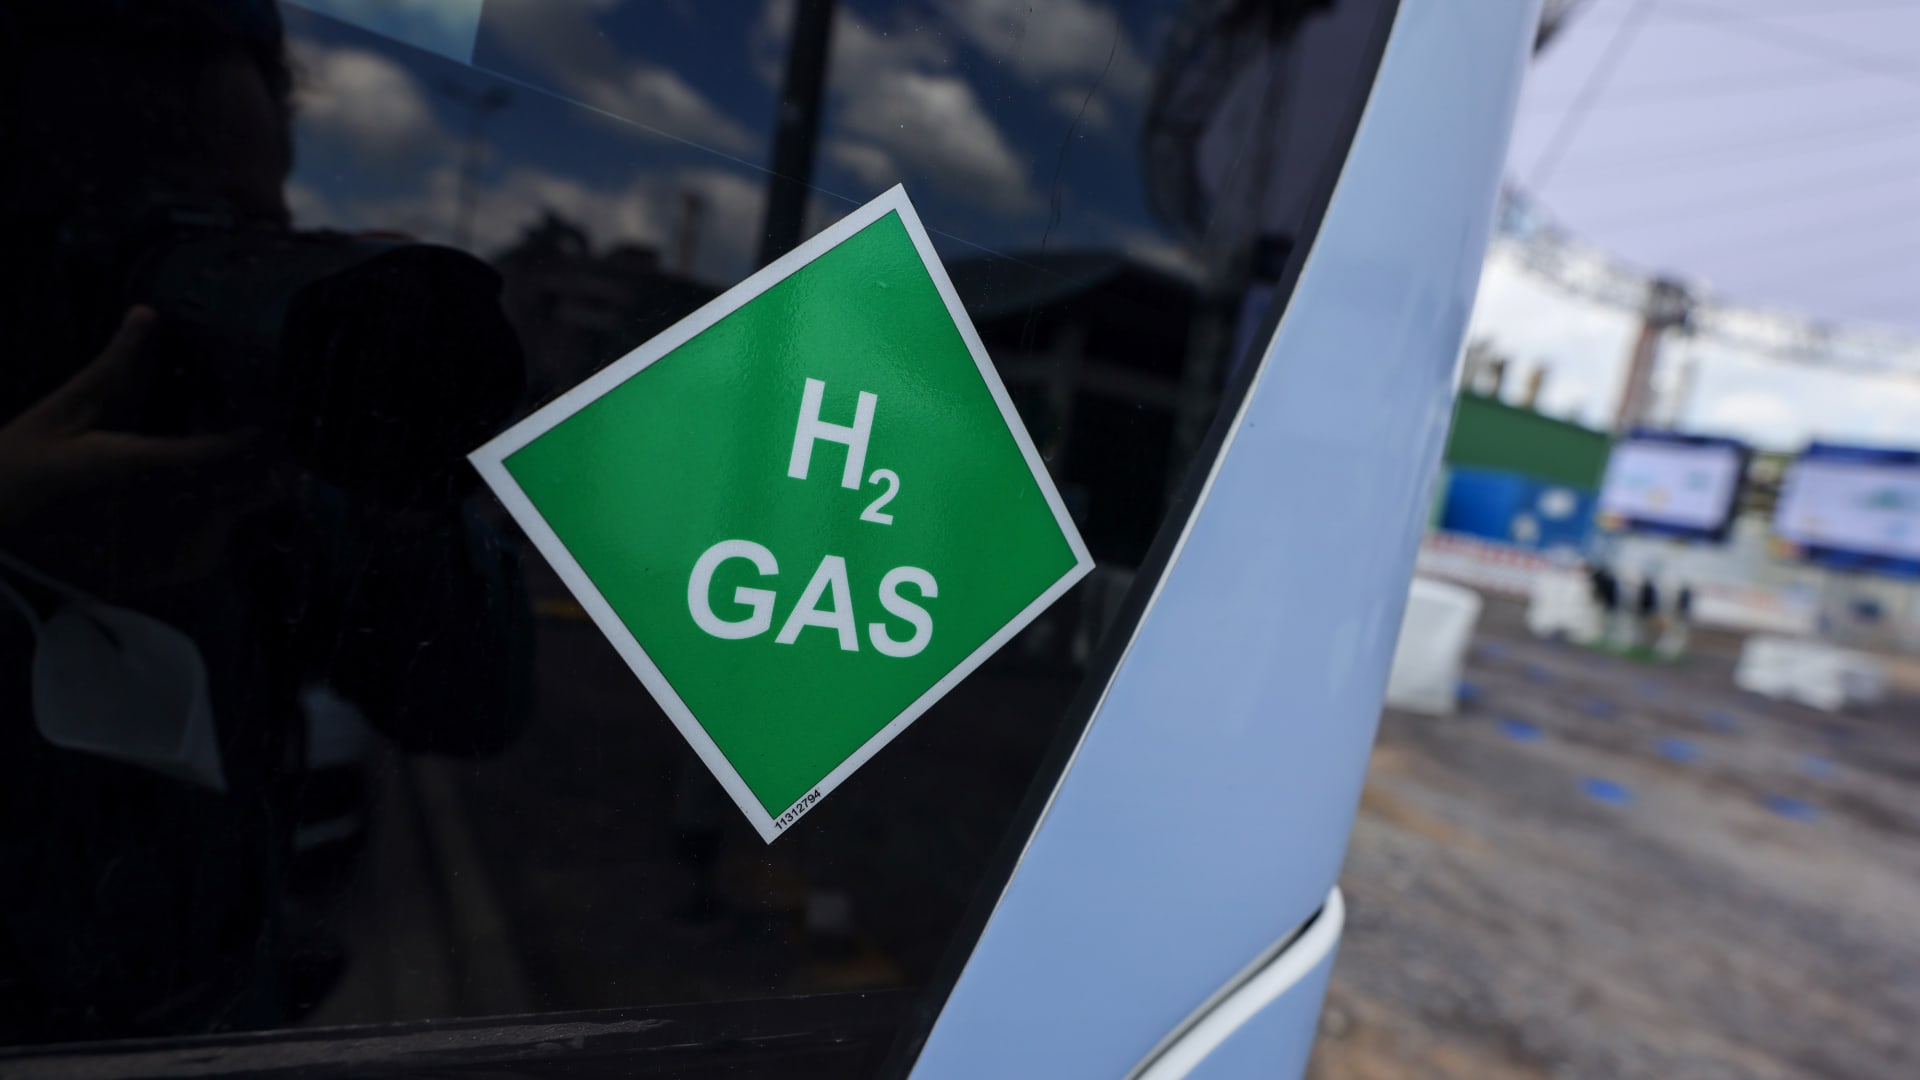 The race is on to make green hydrogen competitive. And Europe is building huge electrolyzers to help